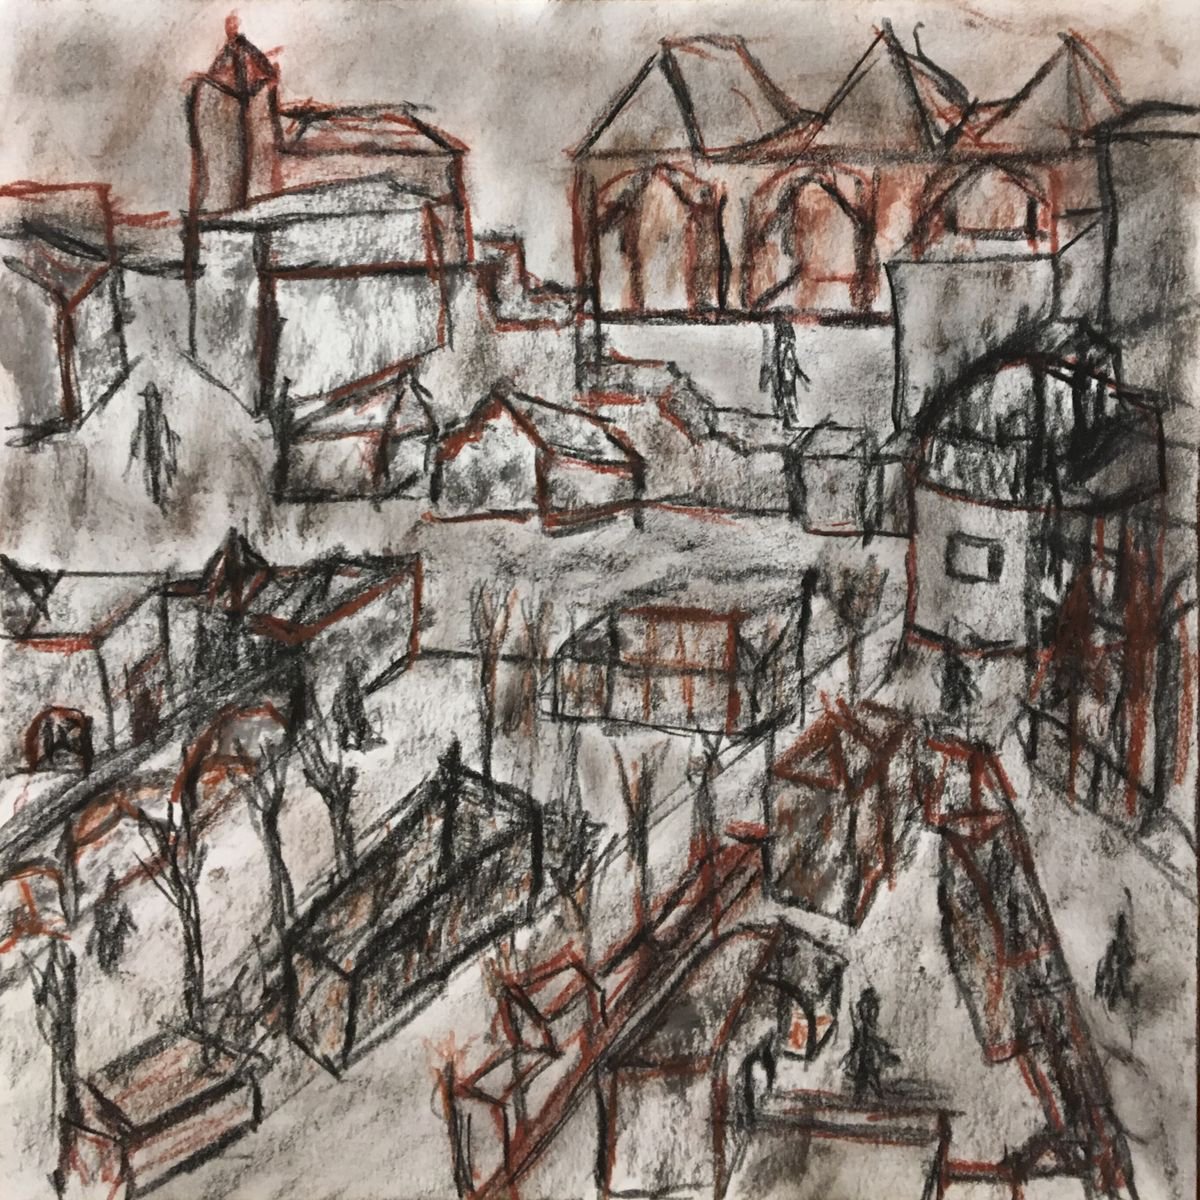 Town II (30x30 cm) by Paola Consonni